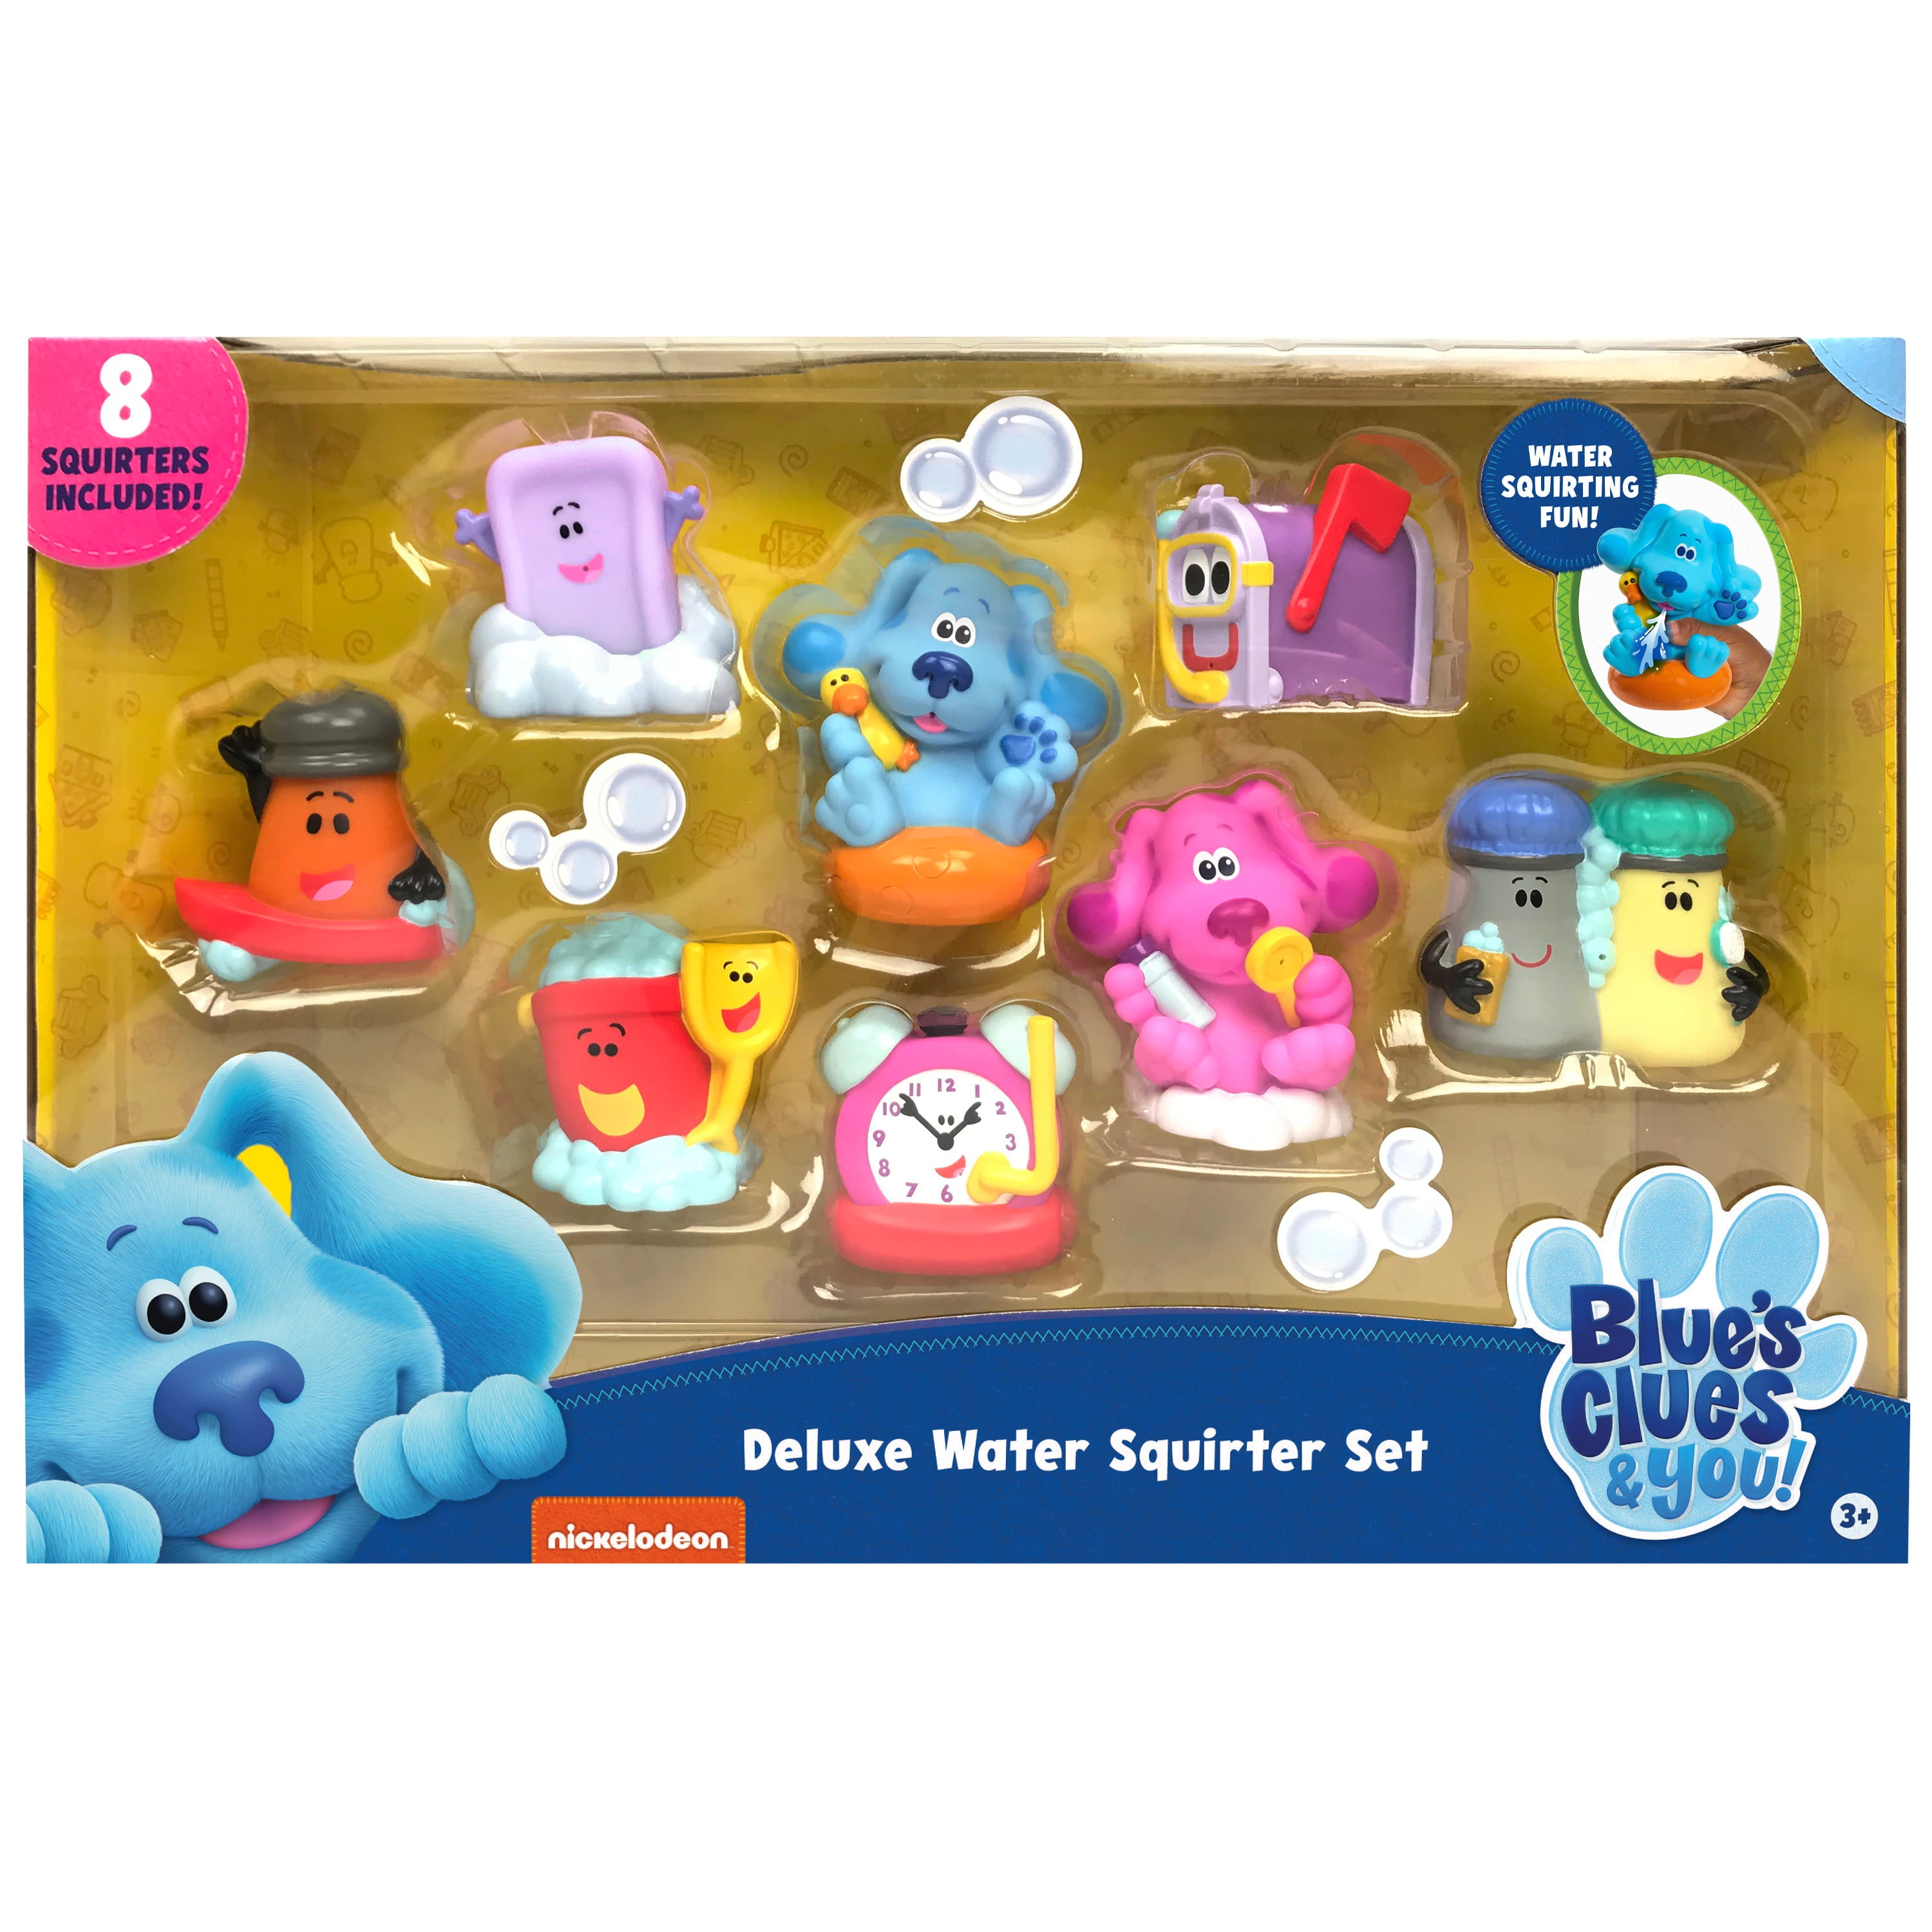 Succes rijm Zijn bekend Blue's Clues & You! Deluxe Bath Toy Set, Includes Blue, Magenta, Slippery  Soap, Shovel & Pail, Mr. Salt & Mrs. Pepper, Paprika, Mailbox, and Tickety  Tock Water and Bath Toys, Ages 3